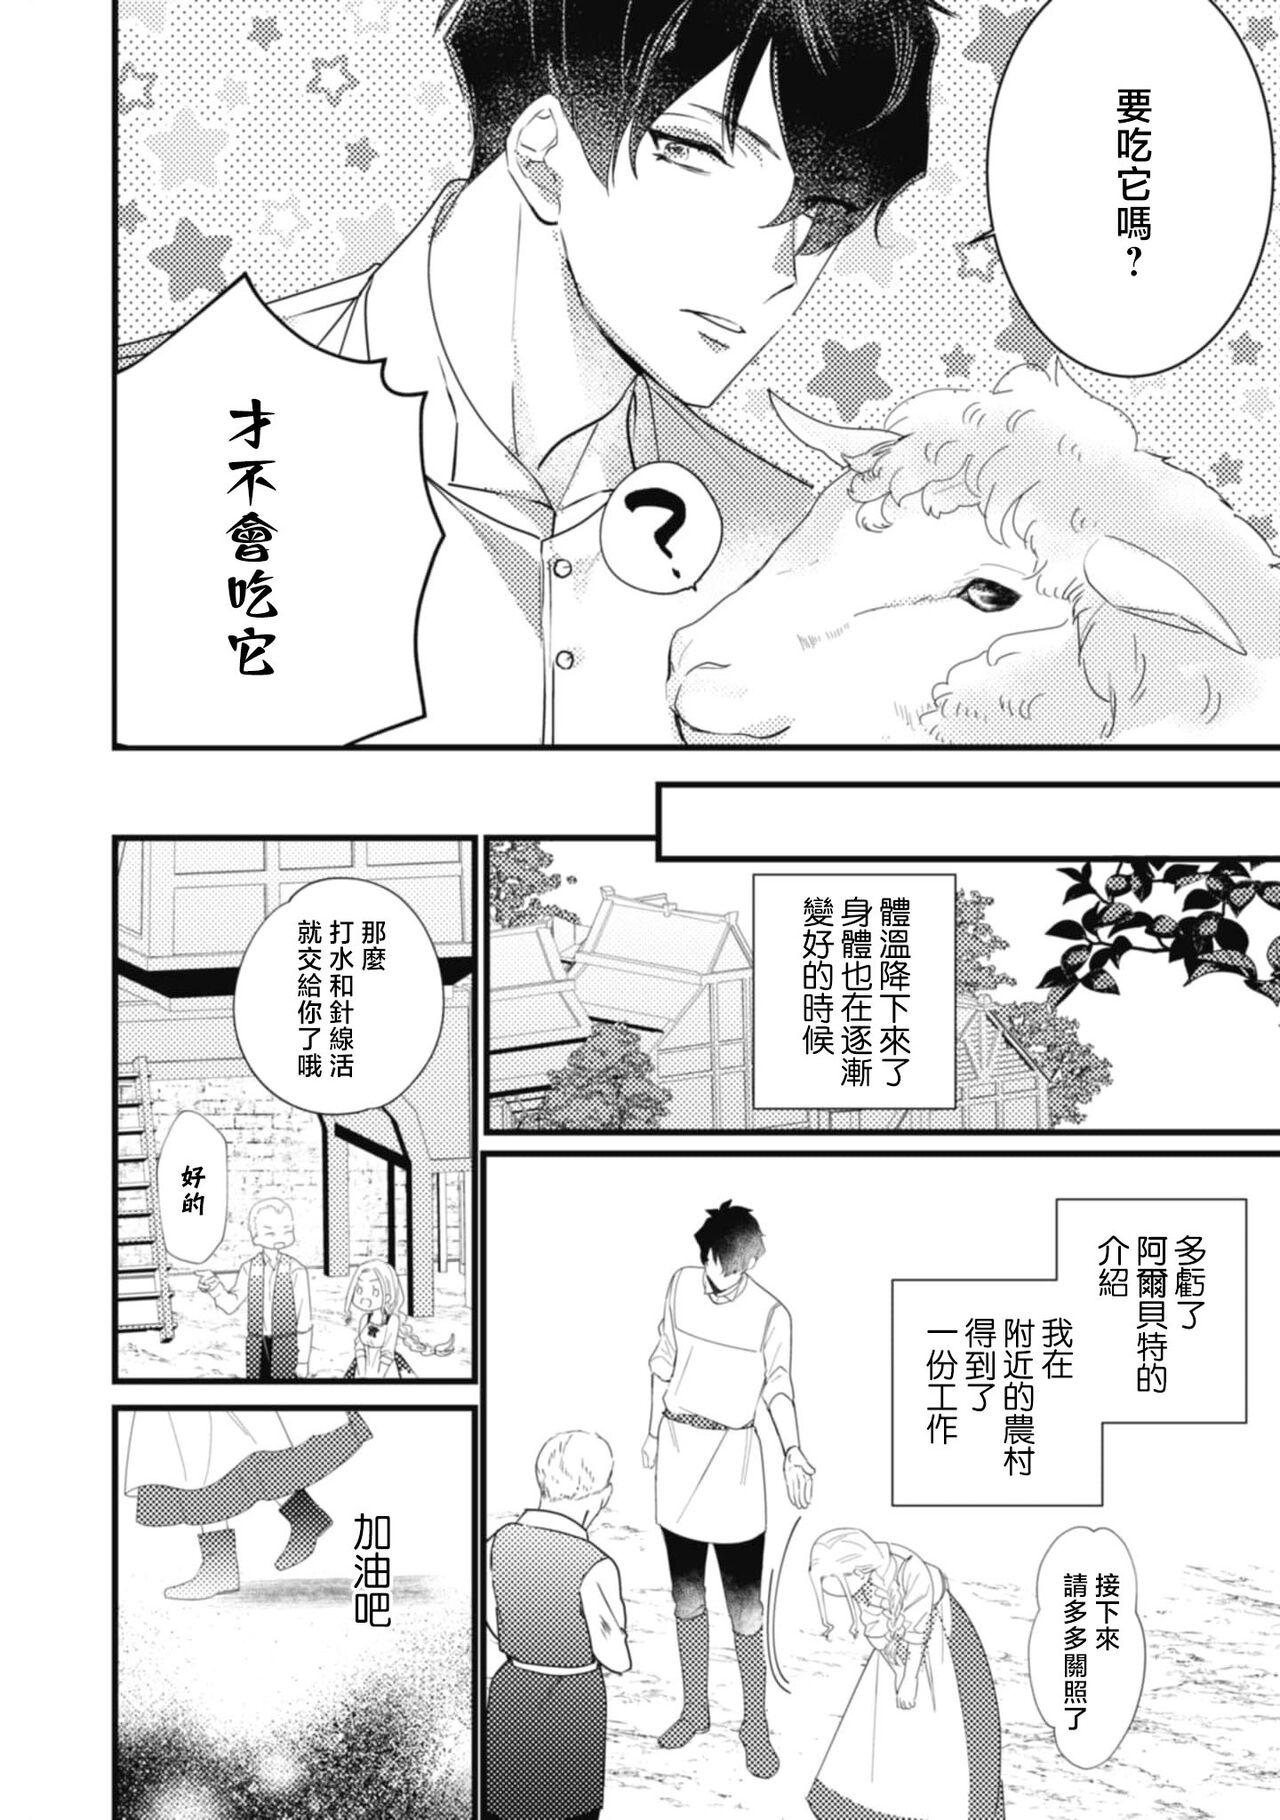 A shepherd in love with a demoted knight | 与被贬骑士相爱的牧羊女1 27